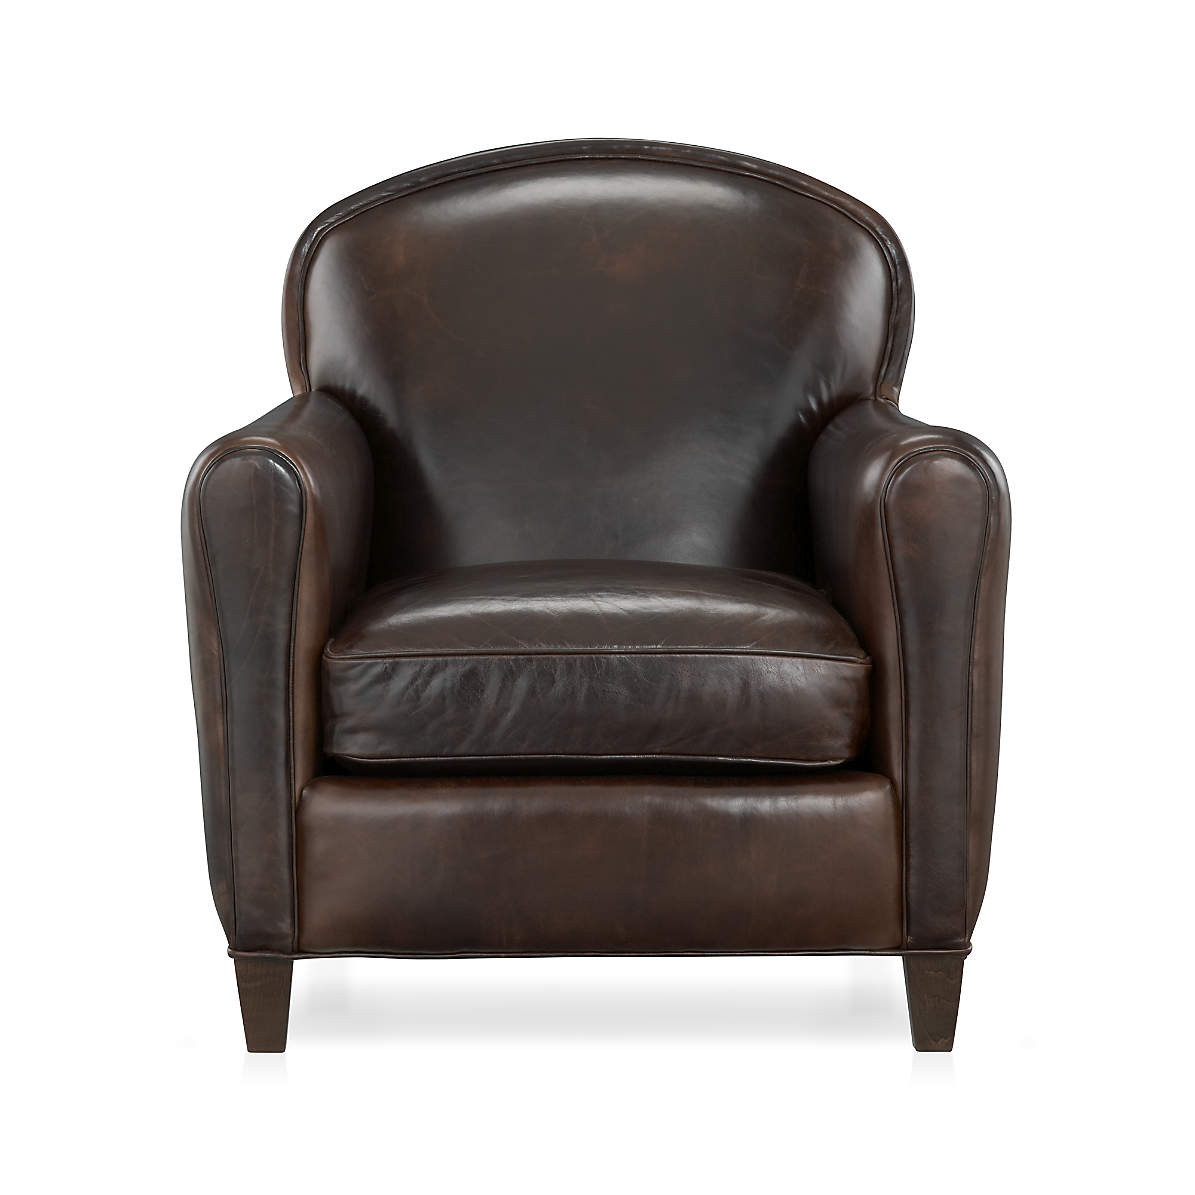 Eiffel Leather Chair Reviews Crate And Barrel